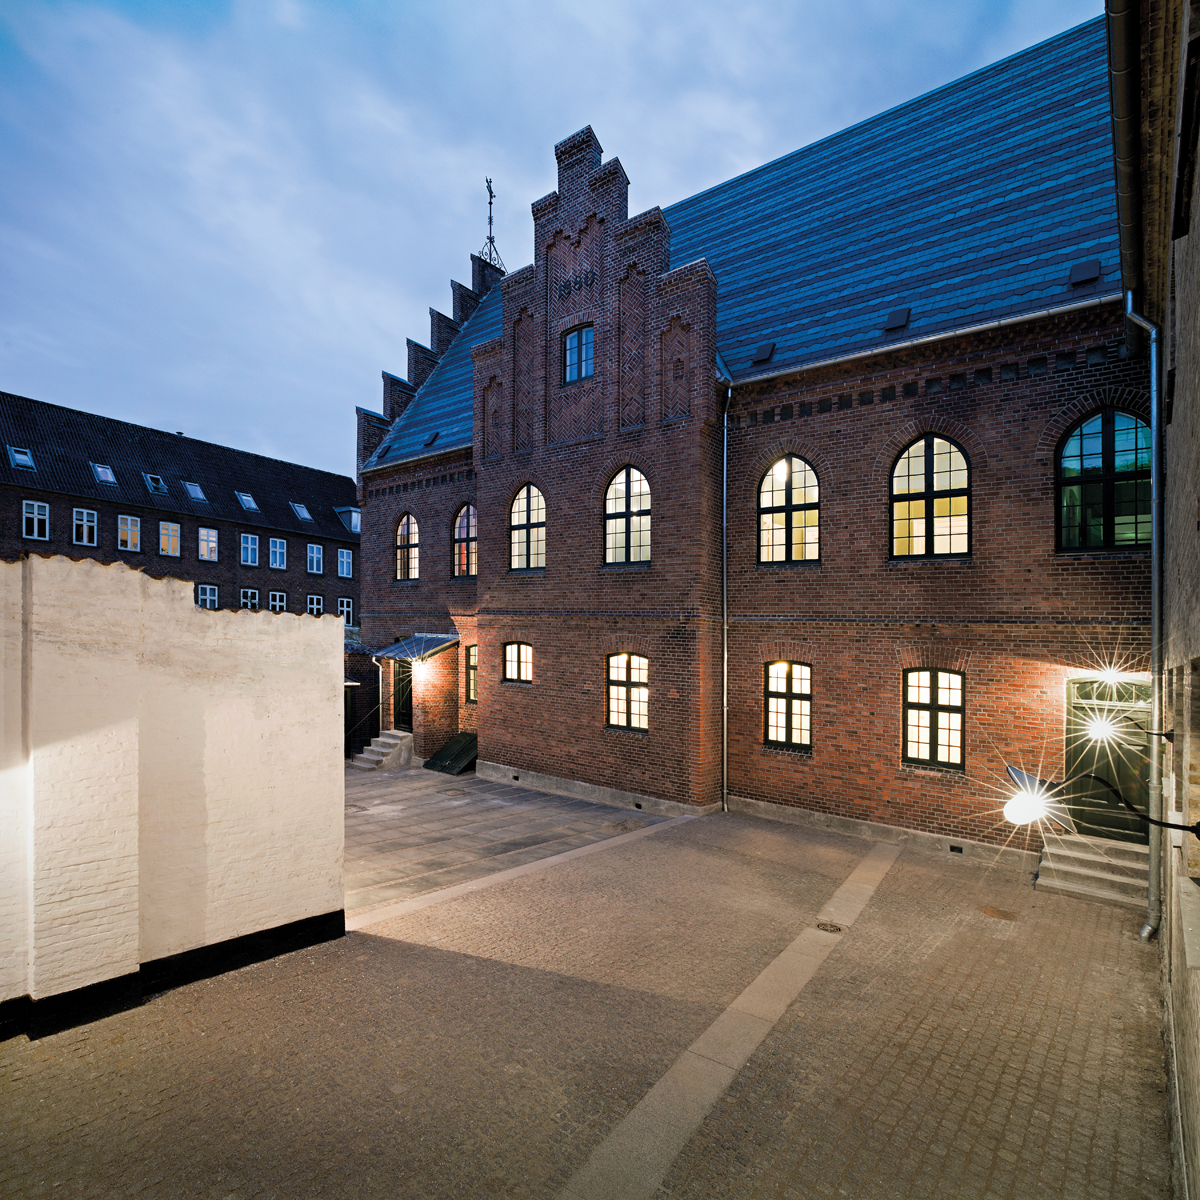 In the yard was originally laid out outdoor space for the prisoners. In the corner is the front door to the detainee's private home. / Credit: Jens Markus Lindhe